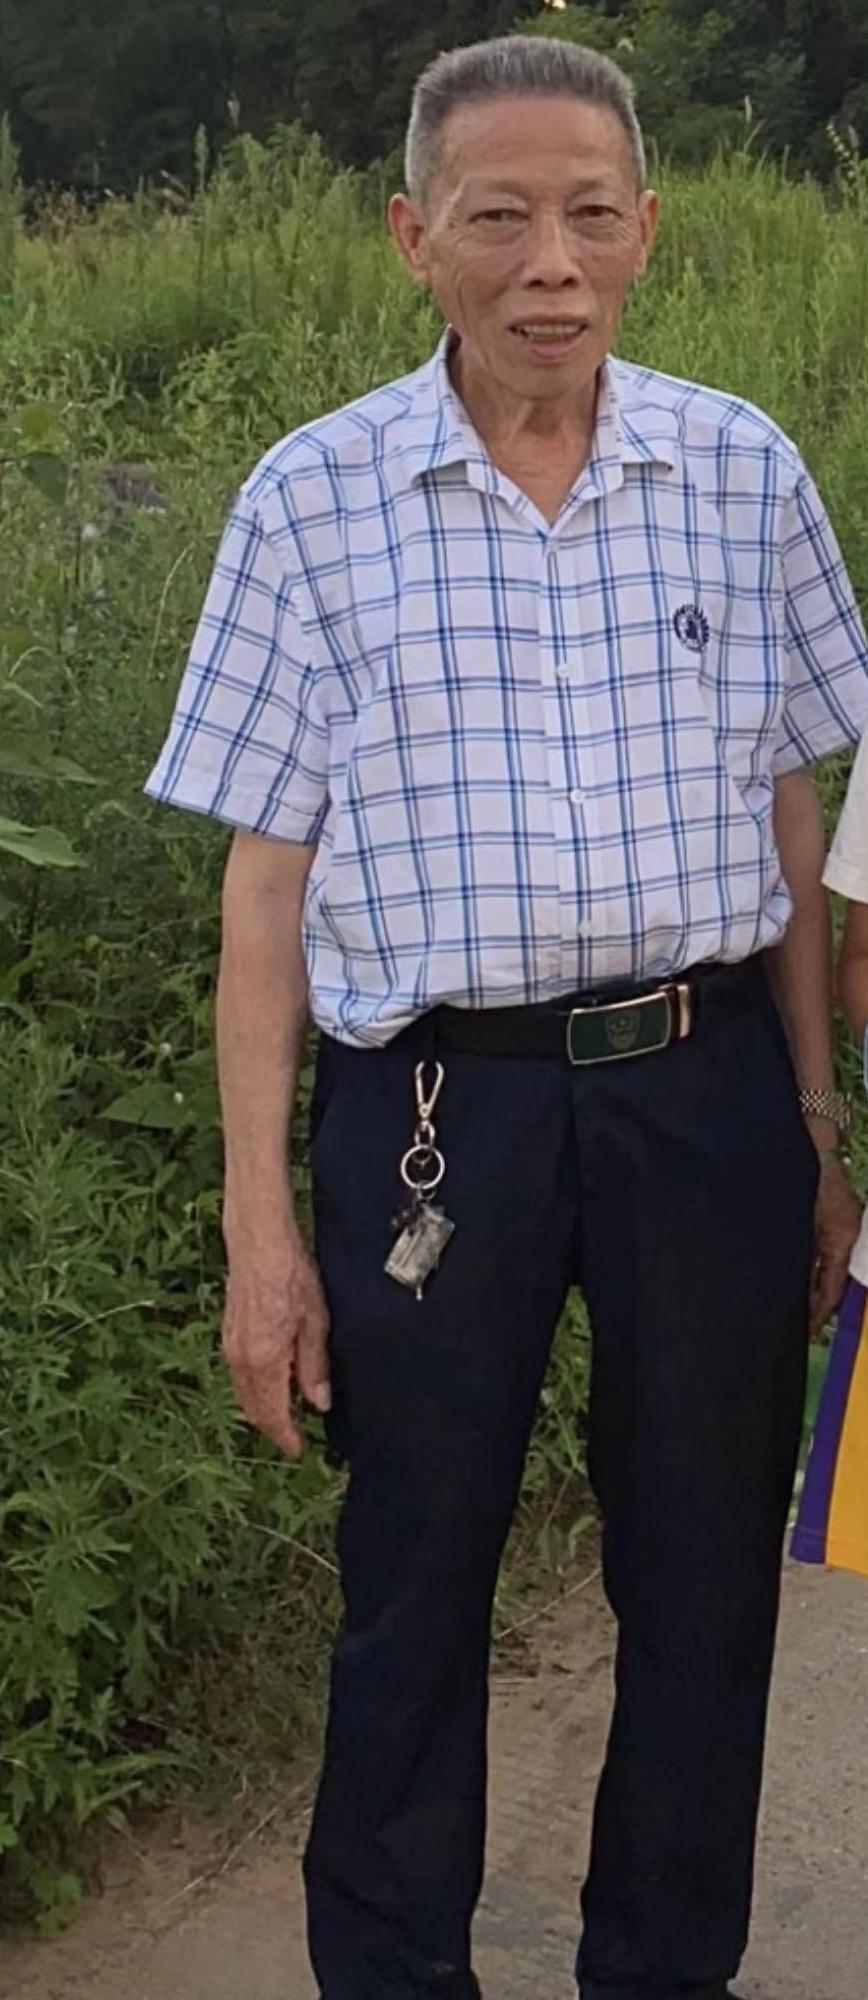 Shen Lihua, aged 66, is about 1.58 metres tall, 46 kilograms in weight and of thin build. He has a long face with yellow complexion and short white hair. He was last seen wearing a navy jacket, blue and white checkered shirt, black trousers, black and white shoes and carrying a black shoulder bag.